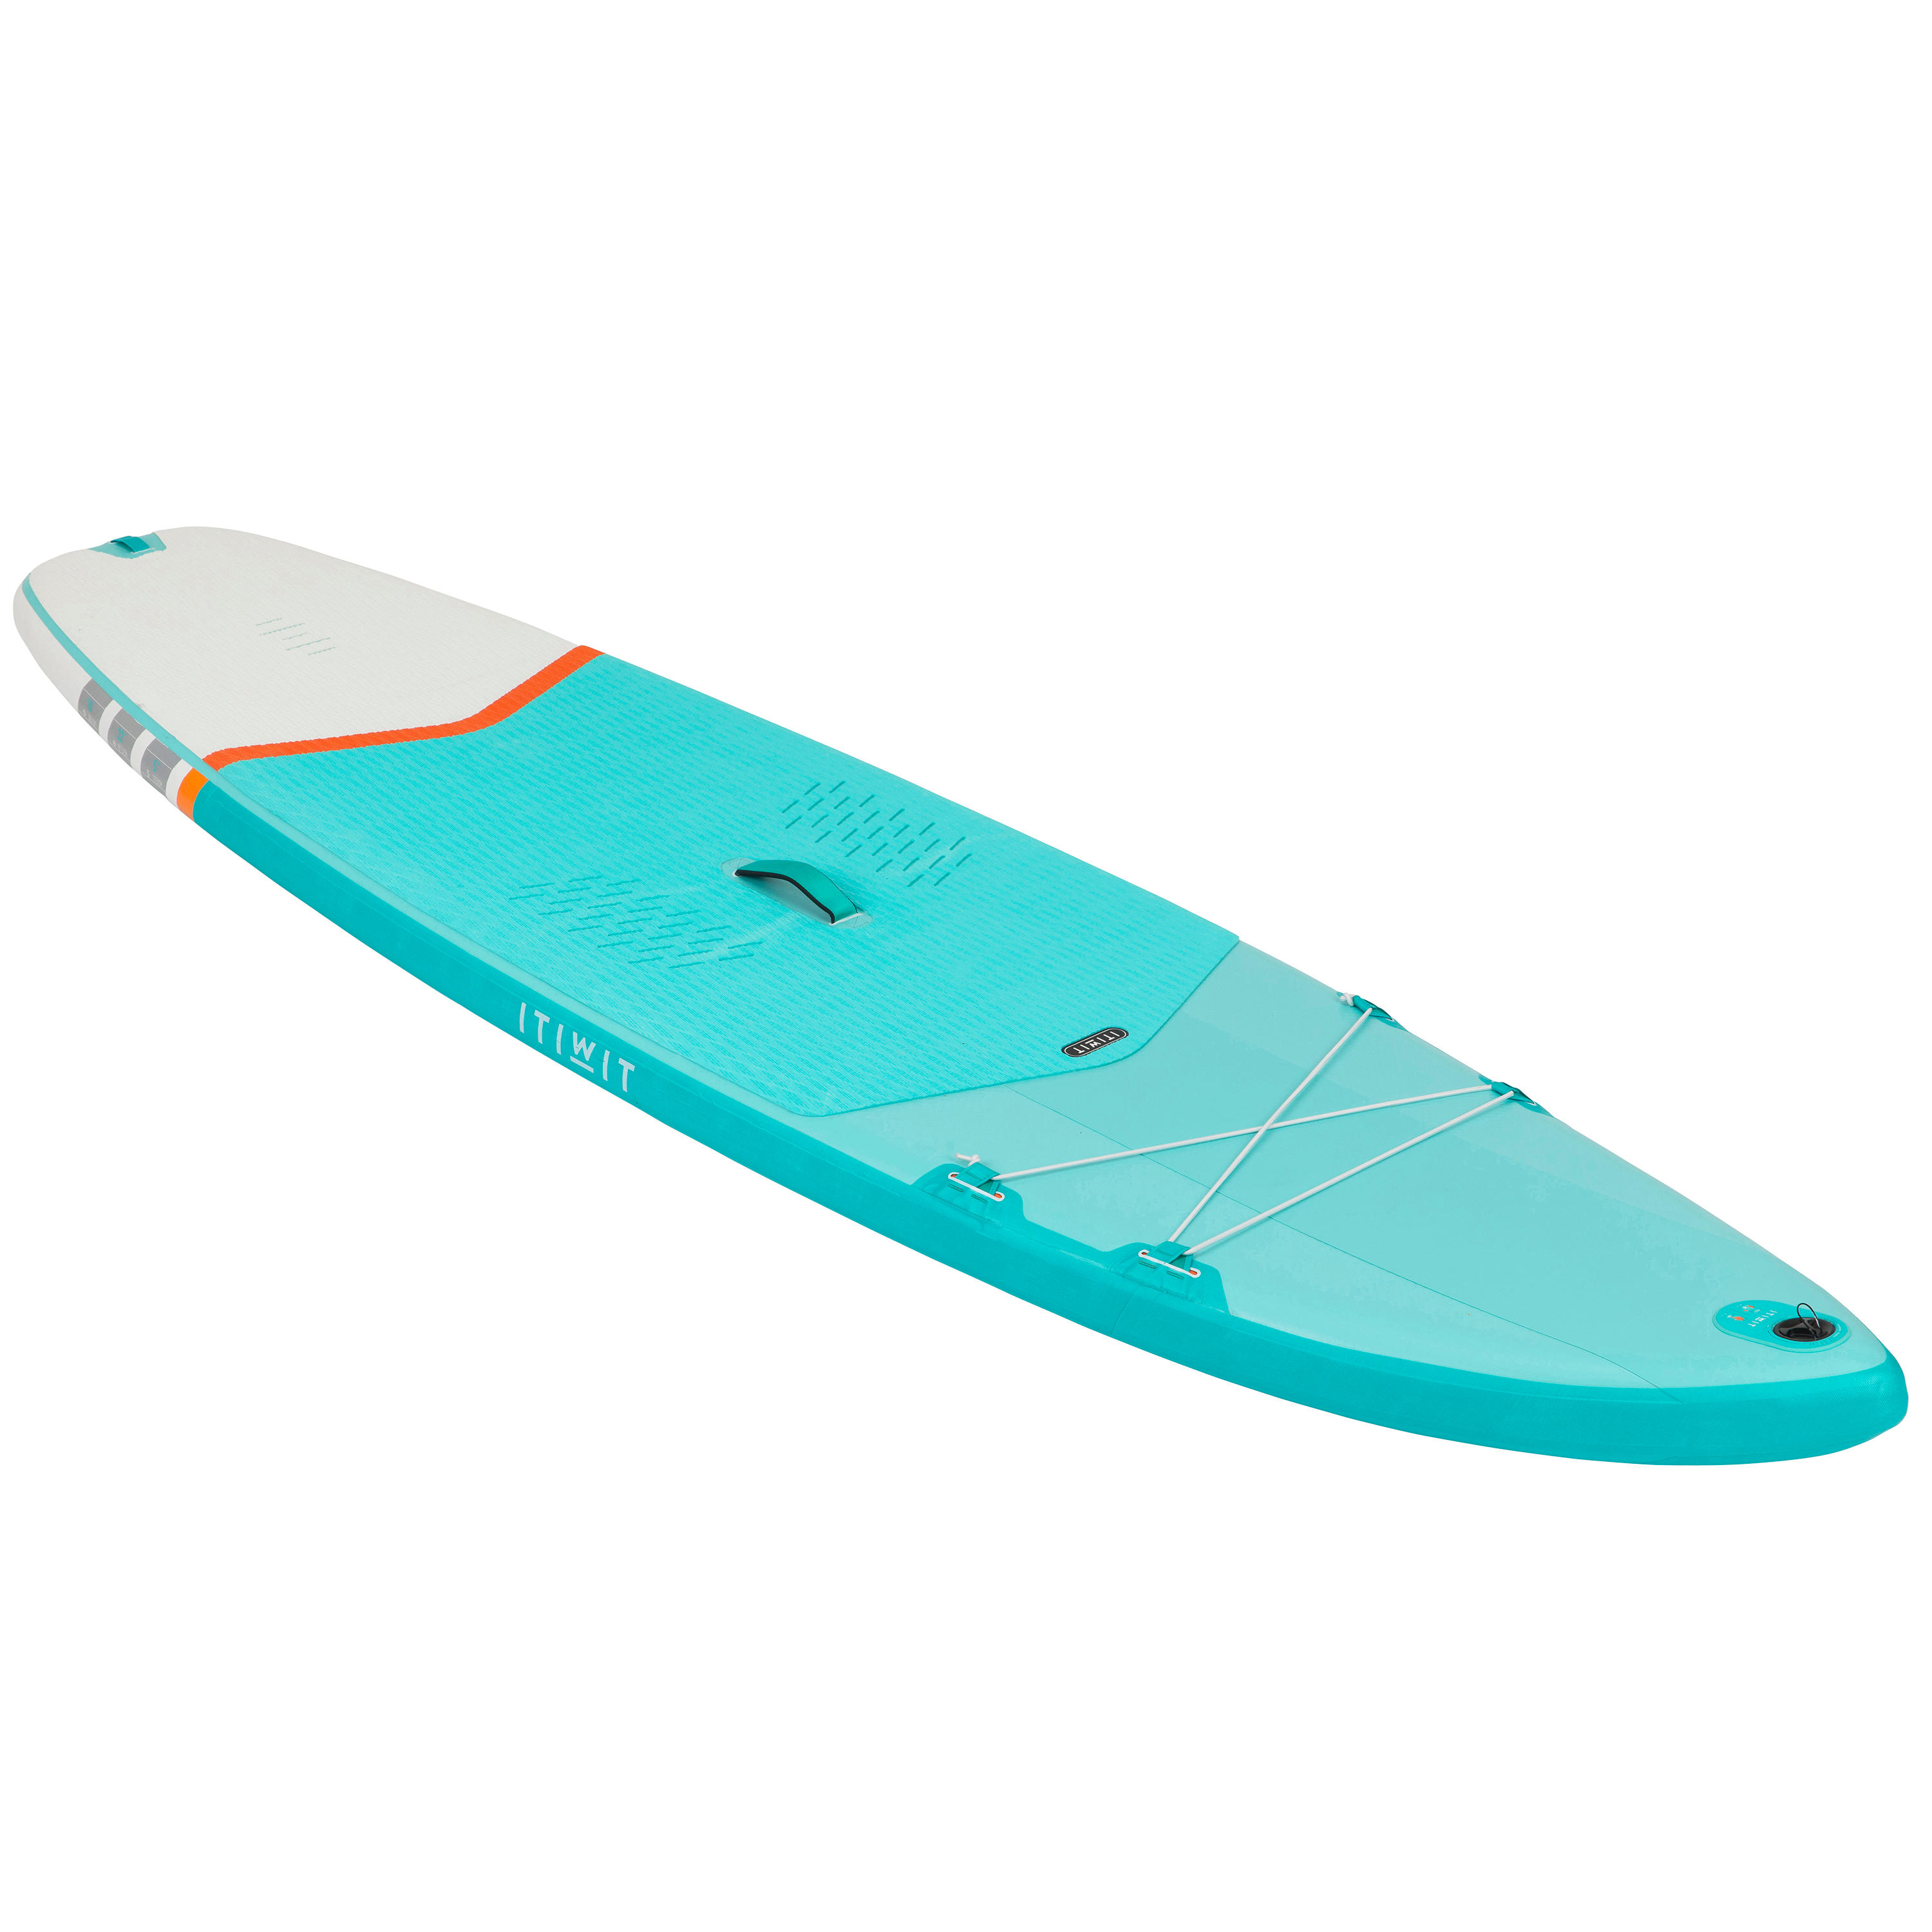 X100 10FT TOURING INFLATABLE STAND-UP PADDLEBOARD - GREEN 5/16